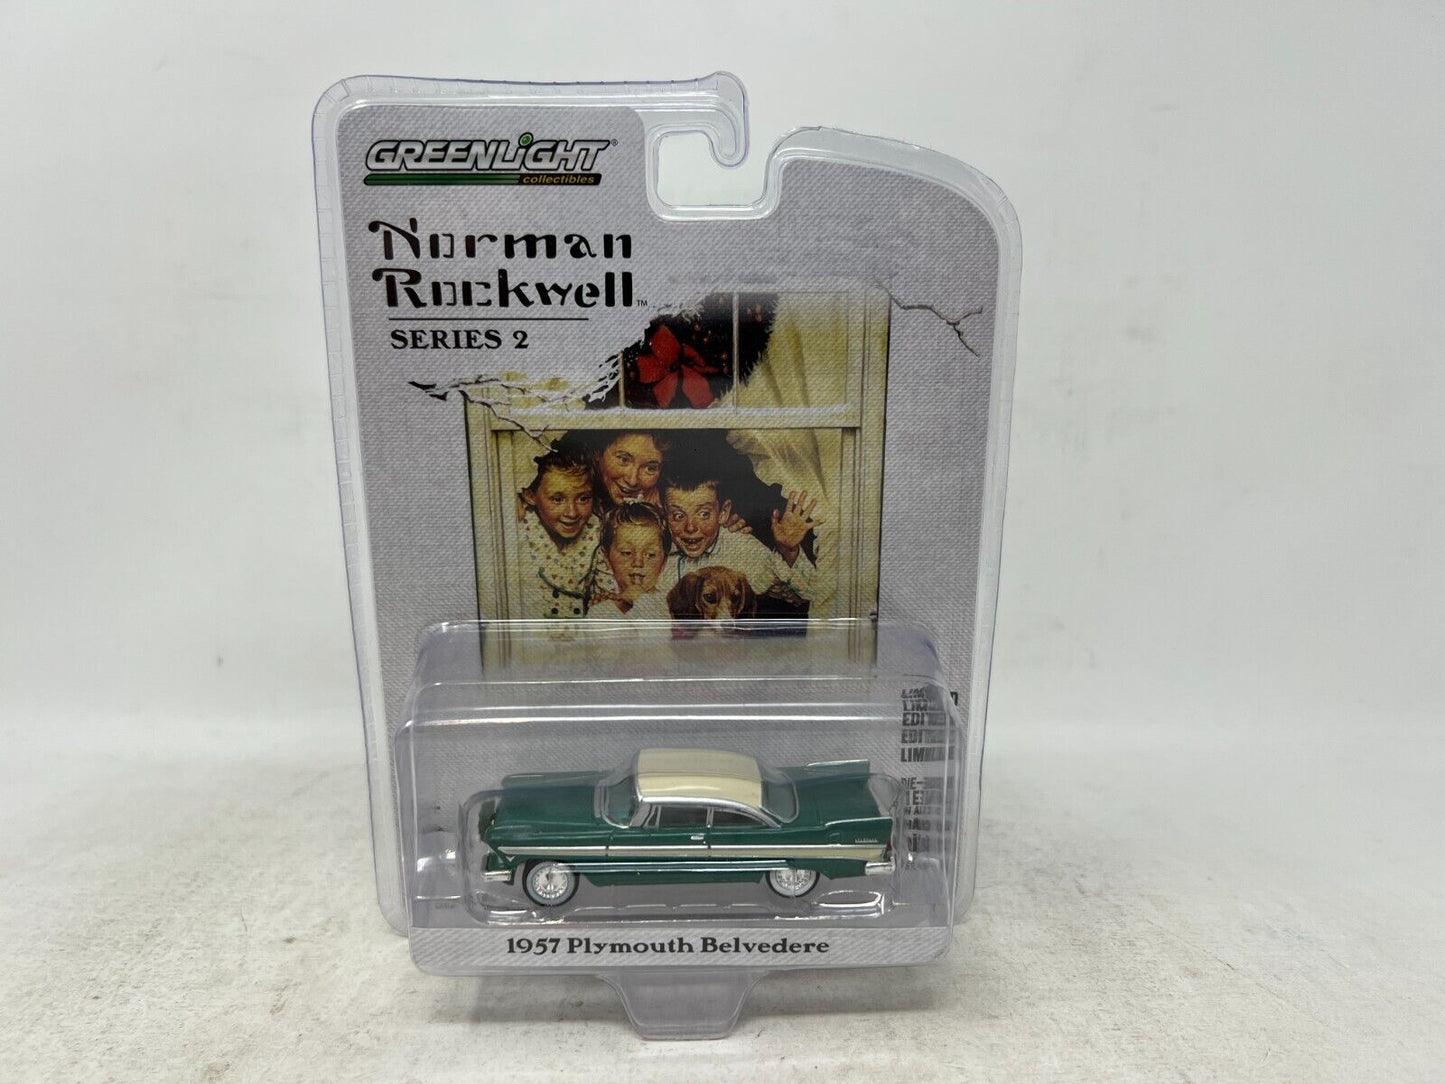 Greenlight Normal Rockwell Series 2 1957 Plymouth Belvedere 1:64 Diecast